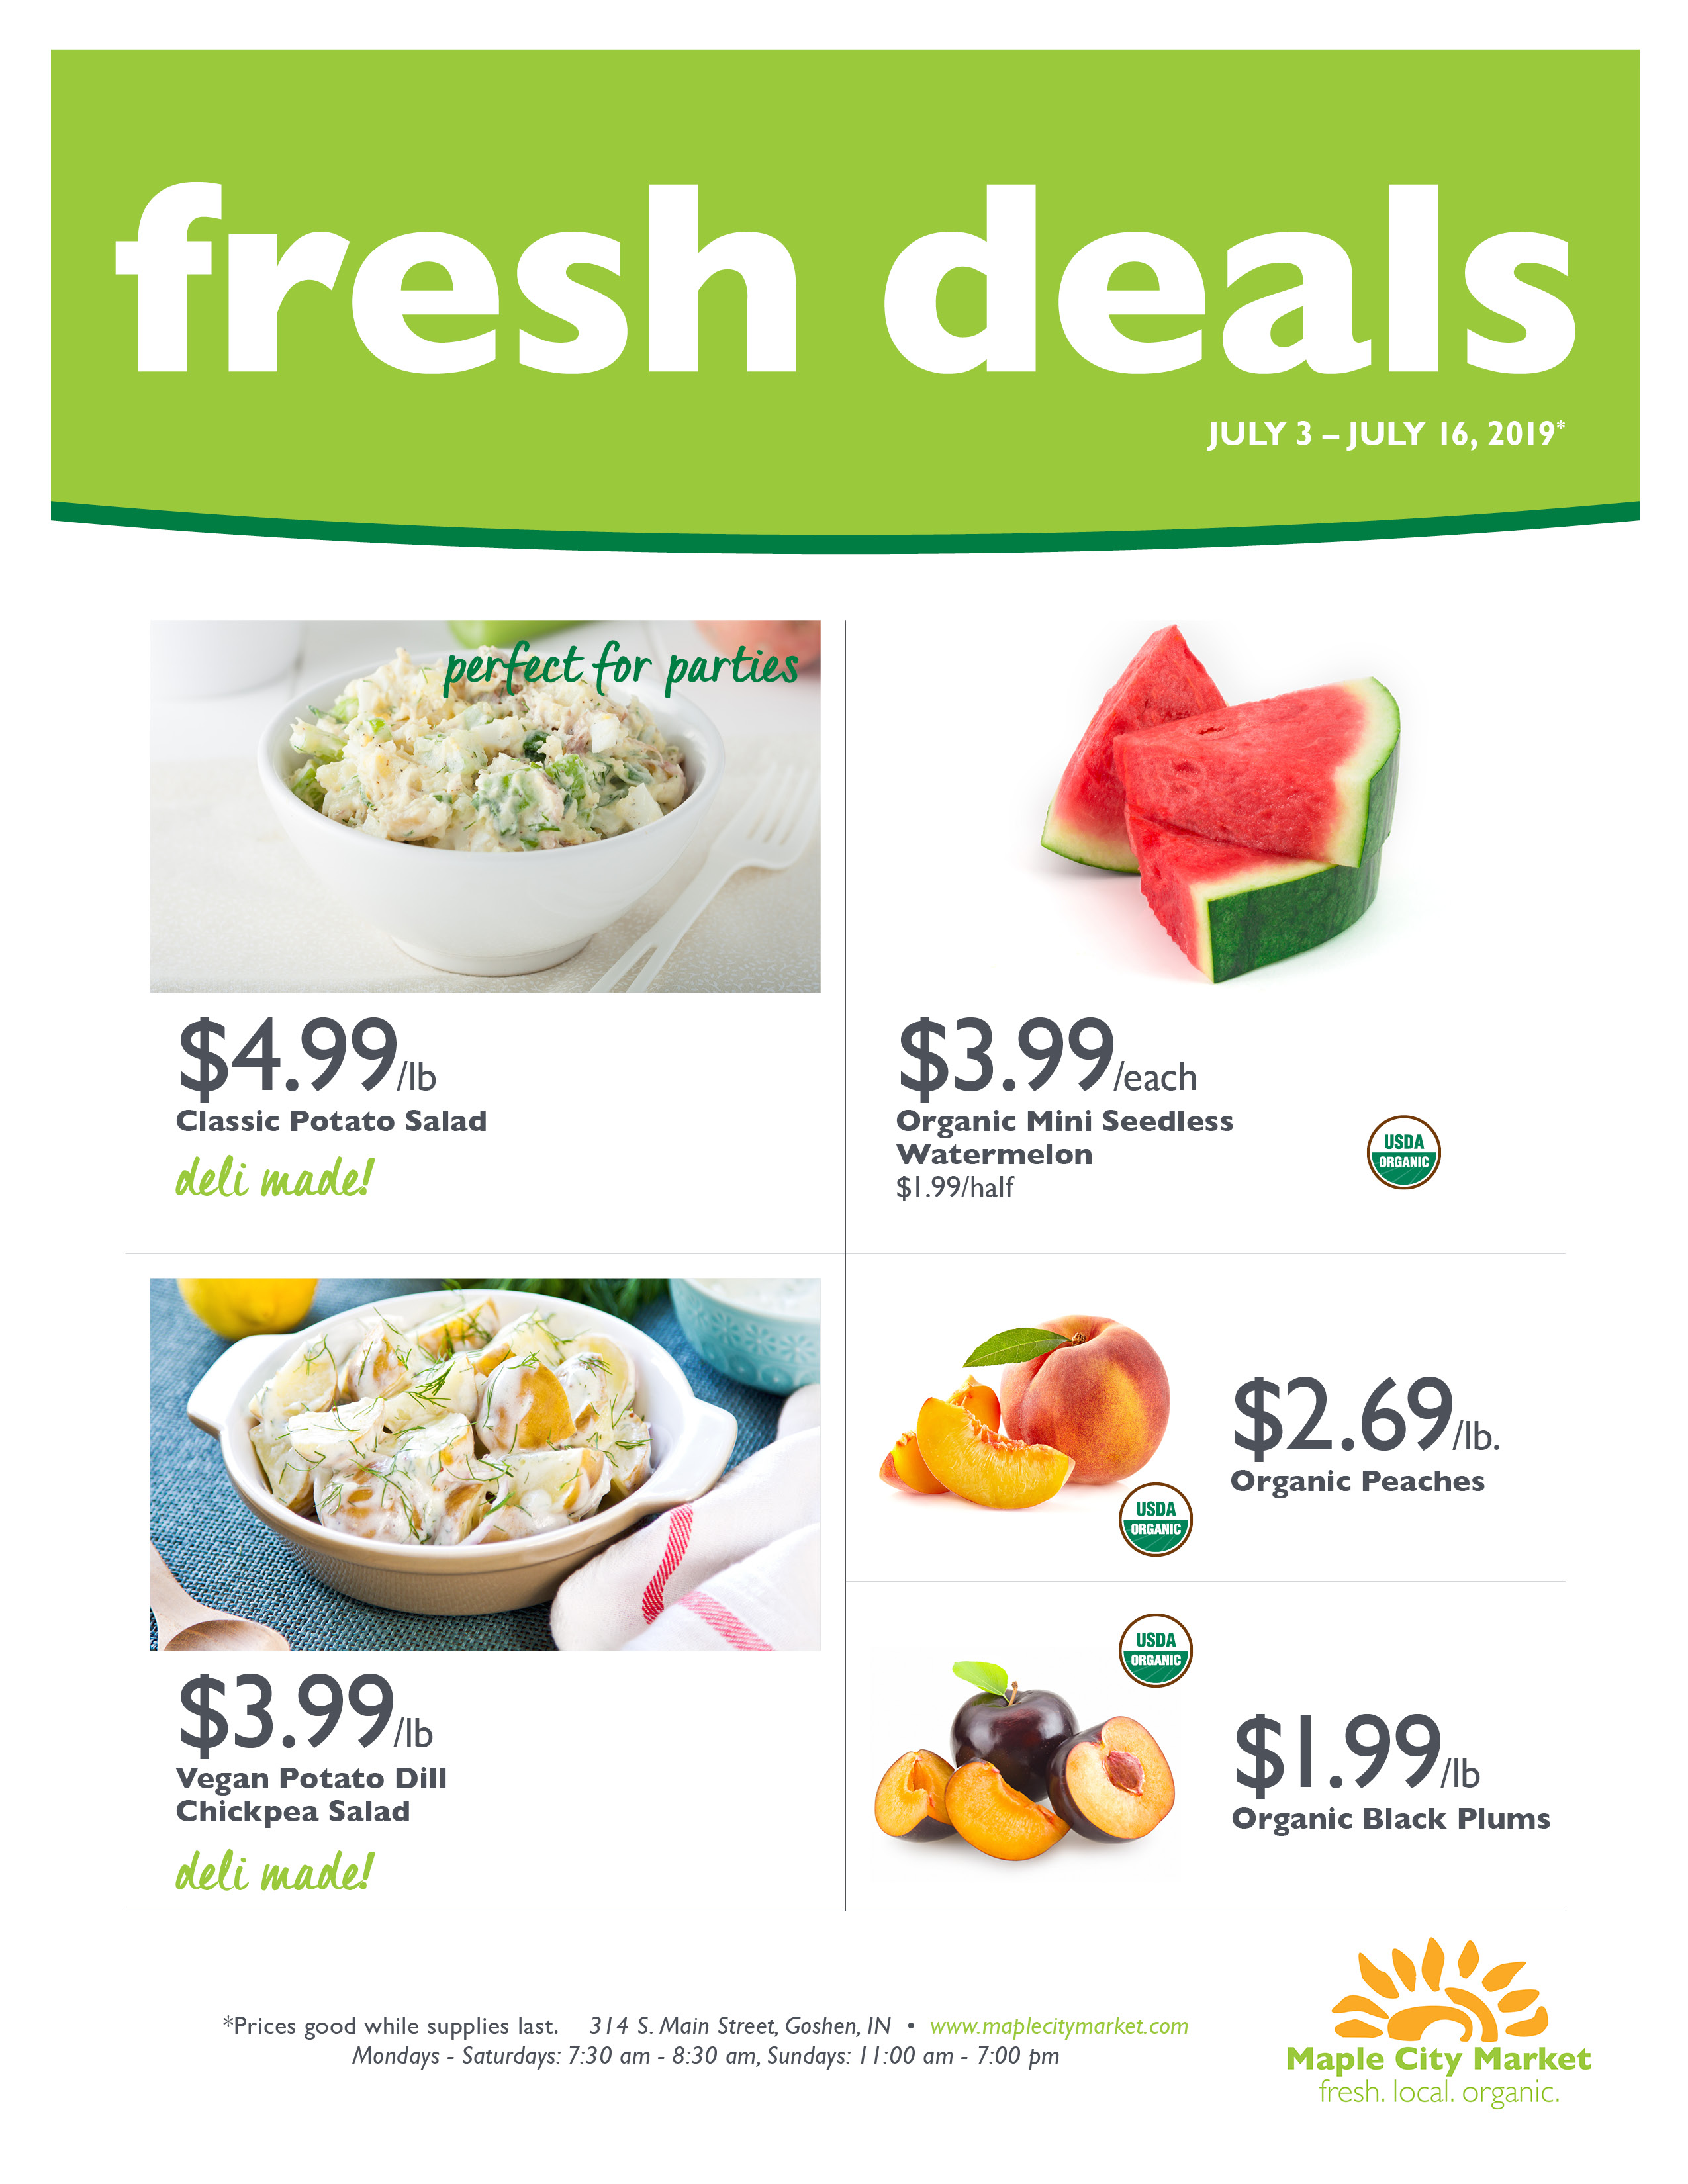 Fresh Deals for July 3-16